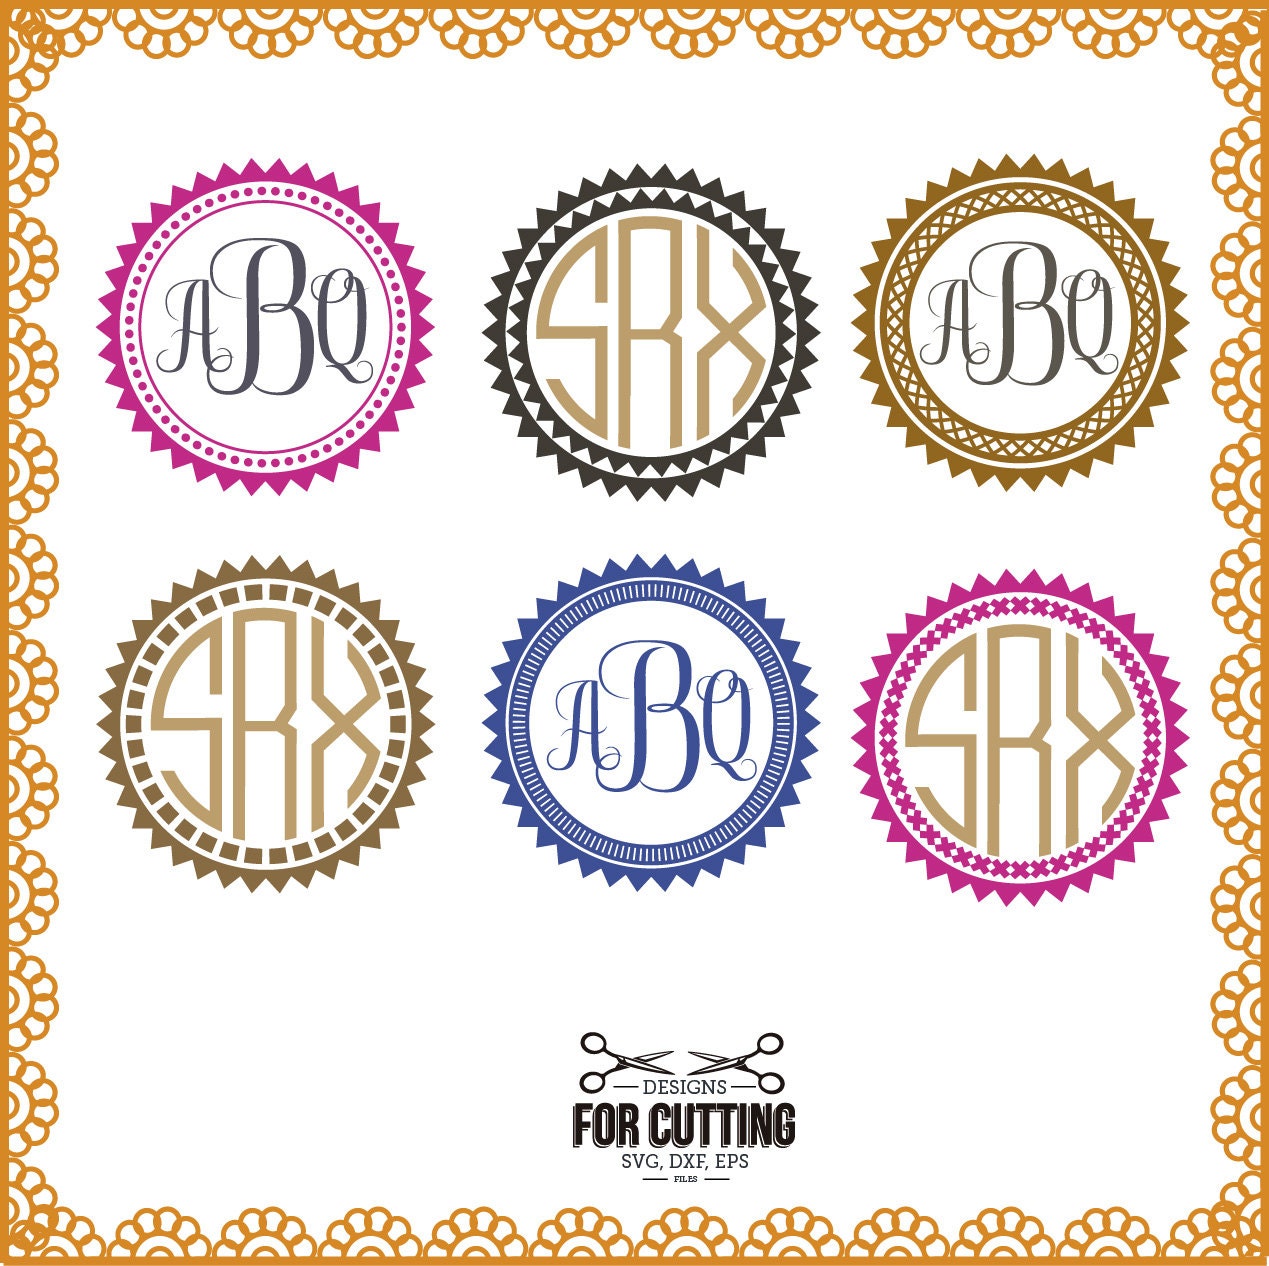 Download Circle pack Monogram frames cut Files SVG DXF EPS. Cutting or